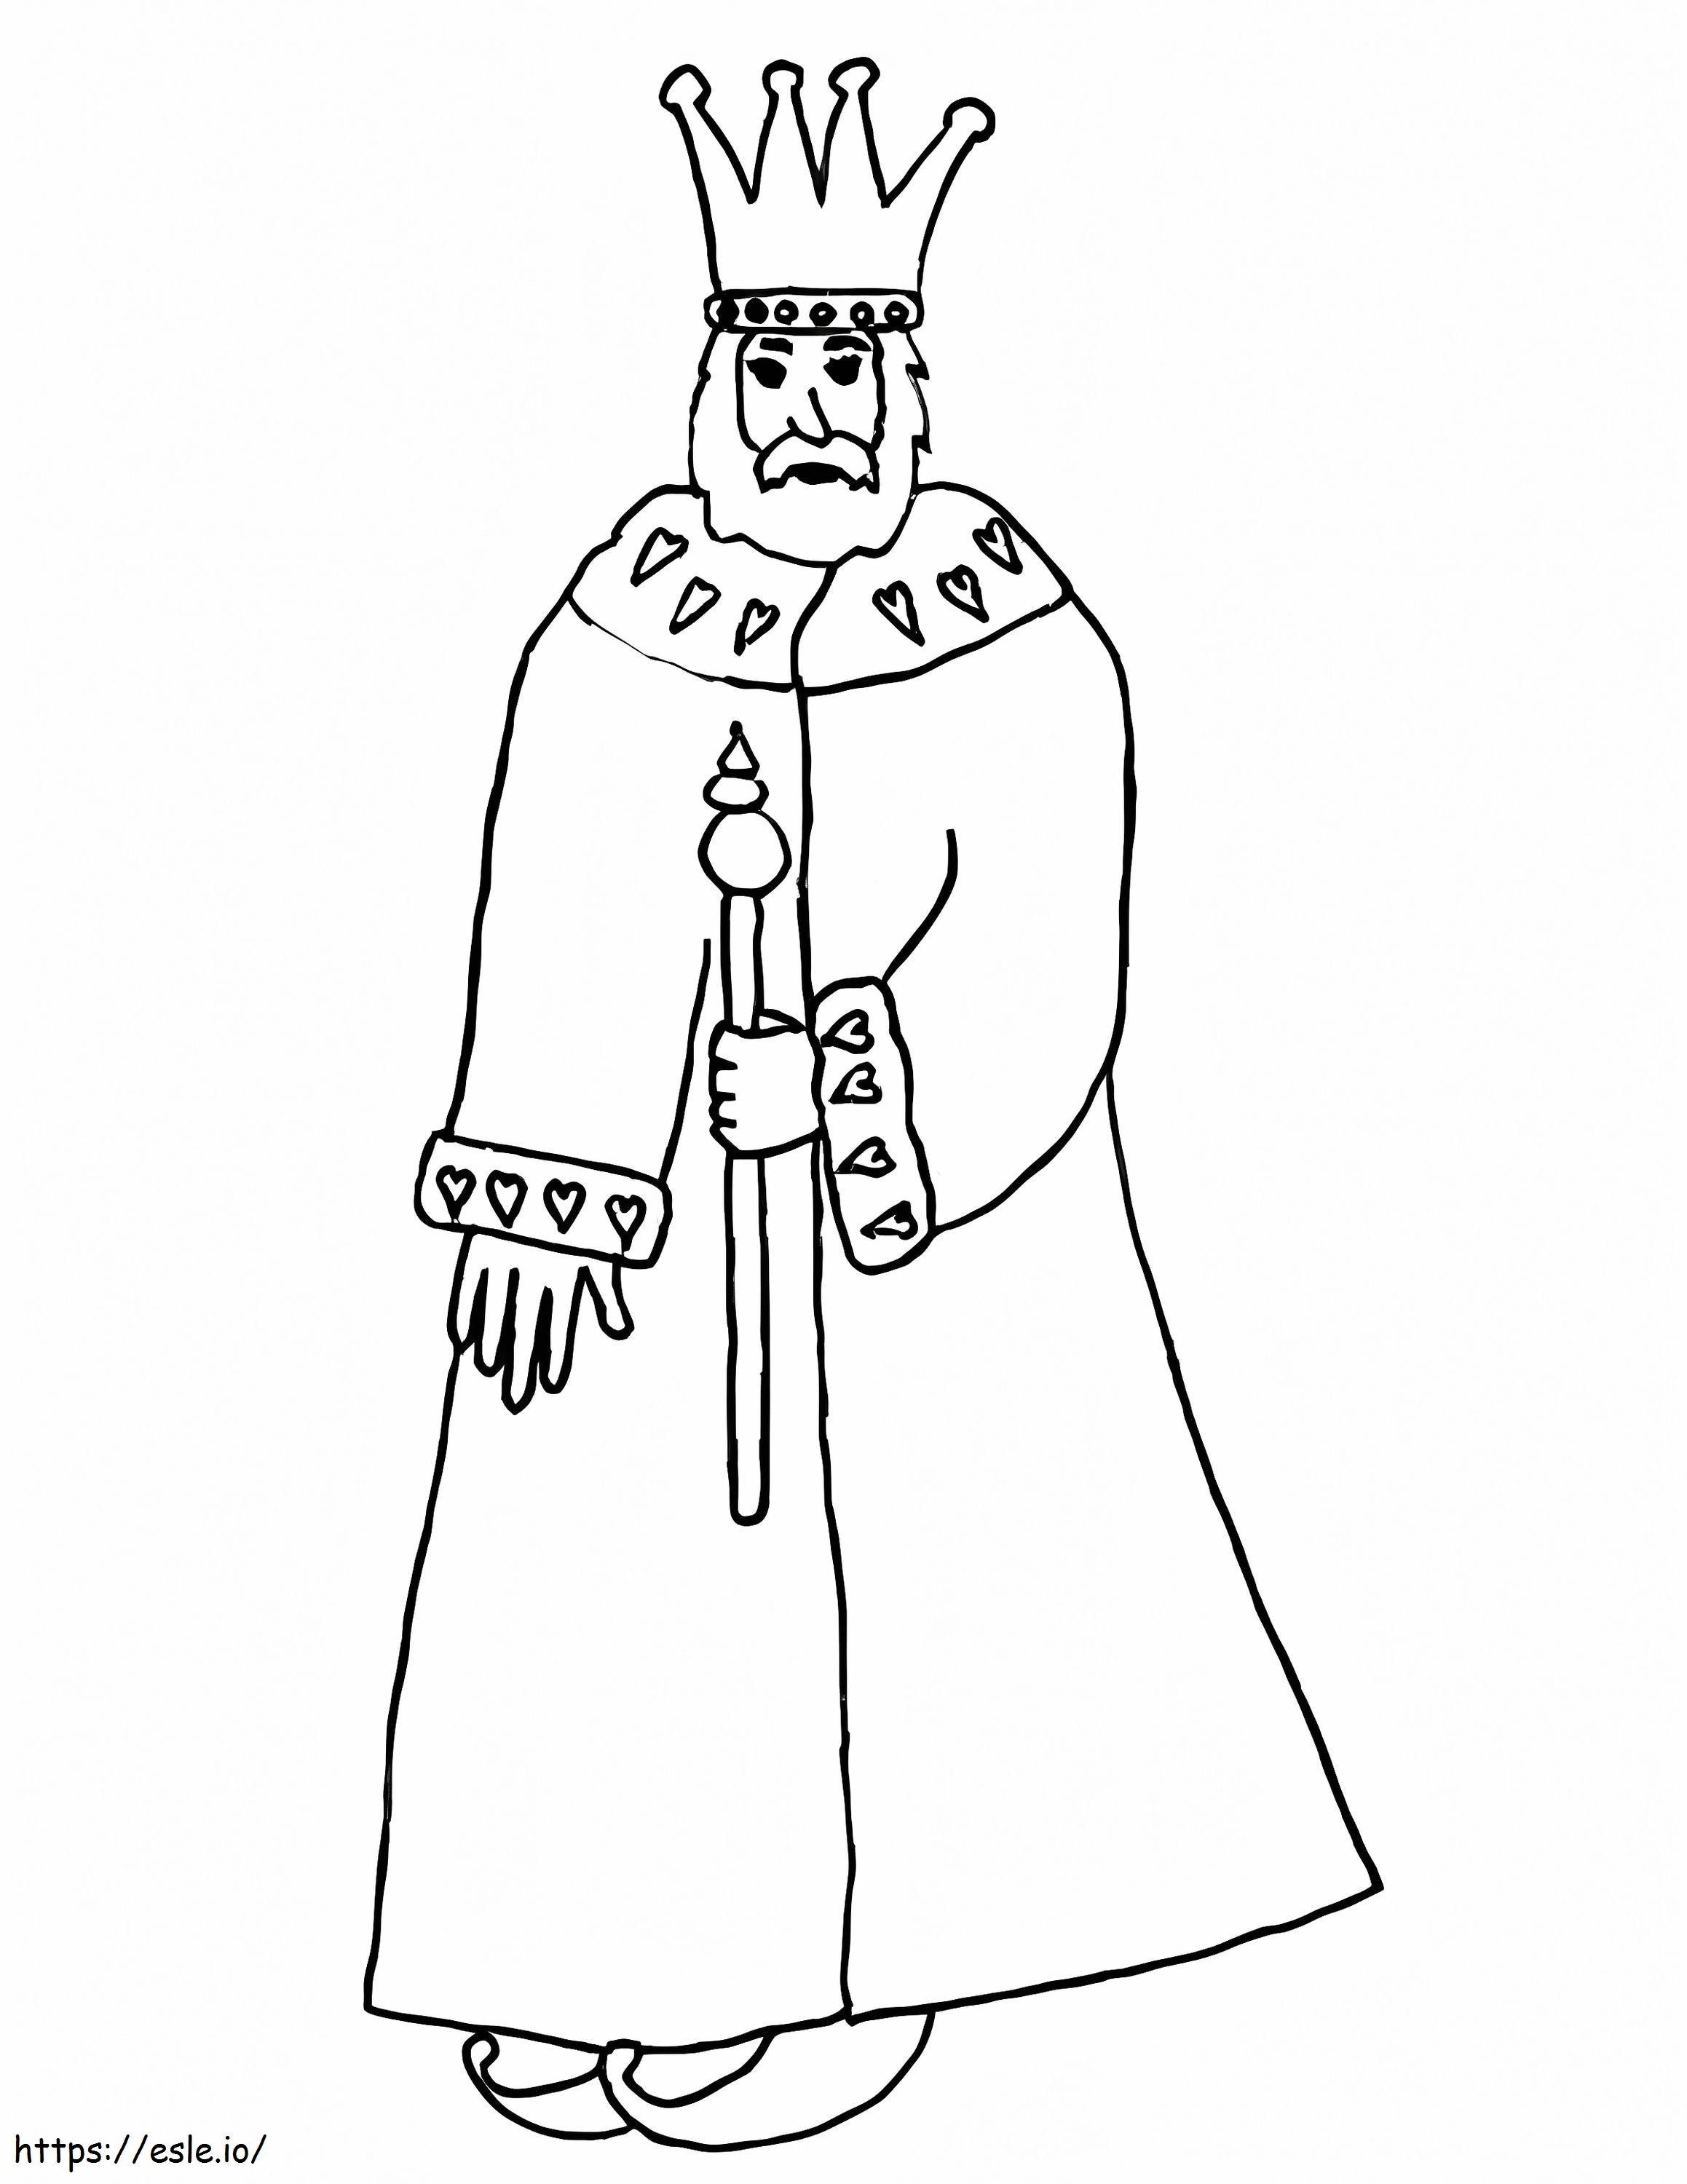 Basic King coloring page